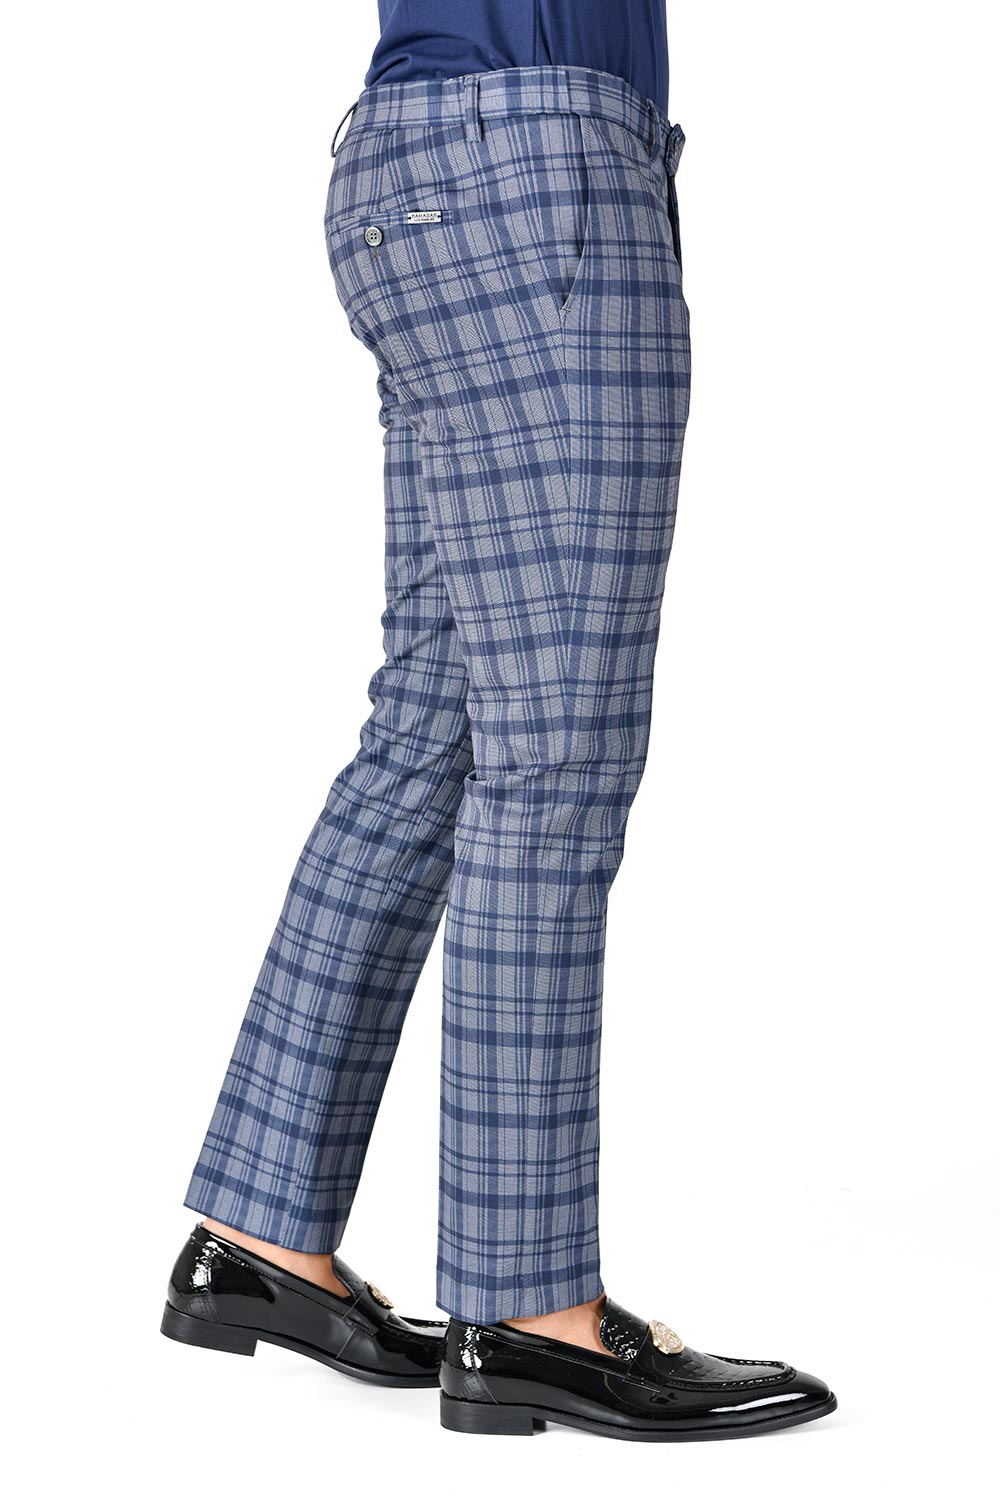 Buy Sky Blue Navy Blue Check Regular Fit Solid Trouser Cotton for Best  Price, Reviews, Free Shipping